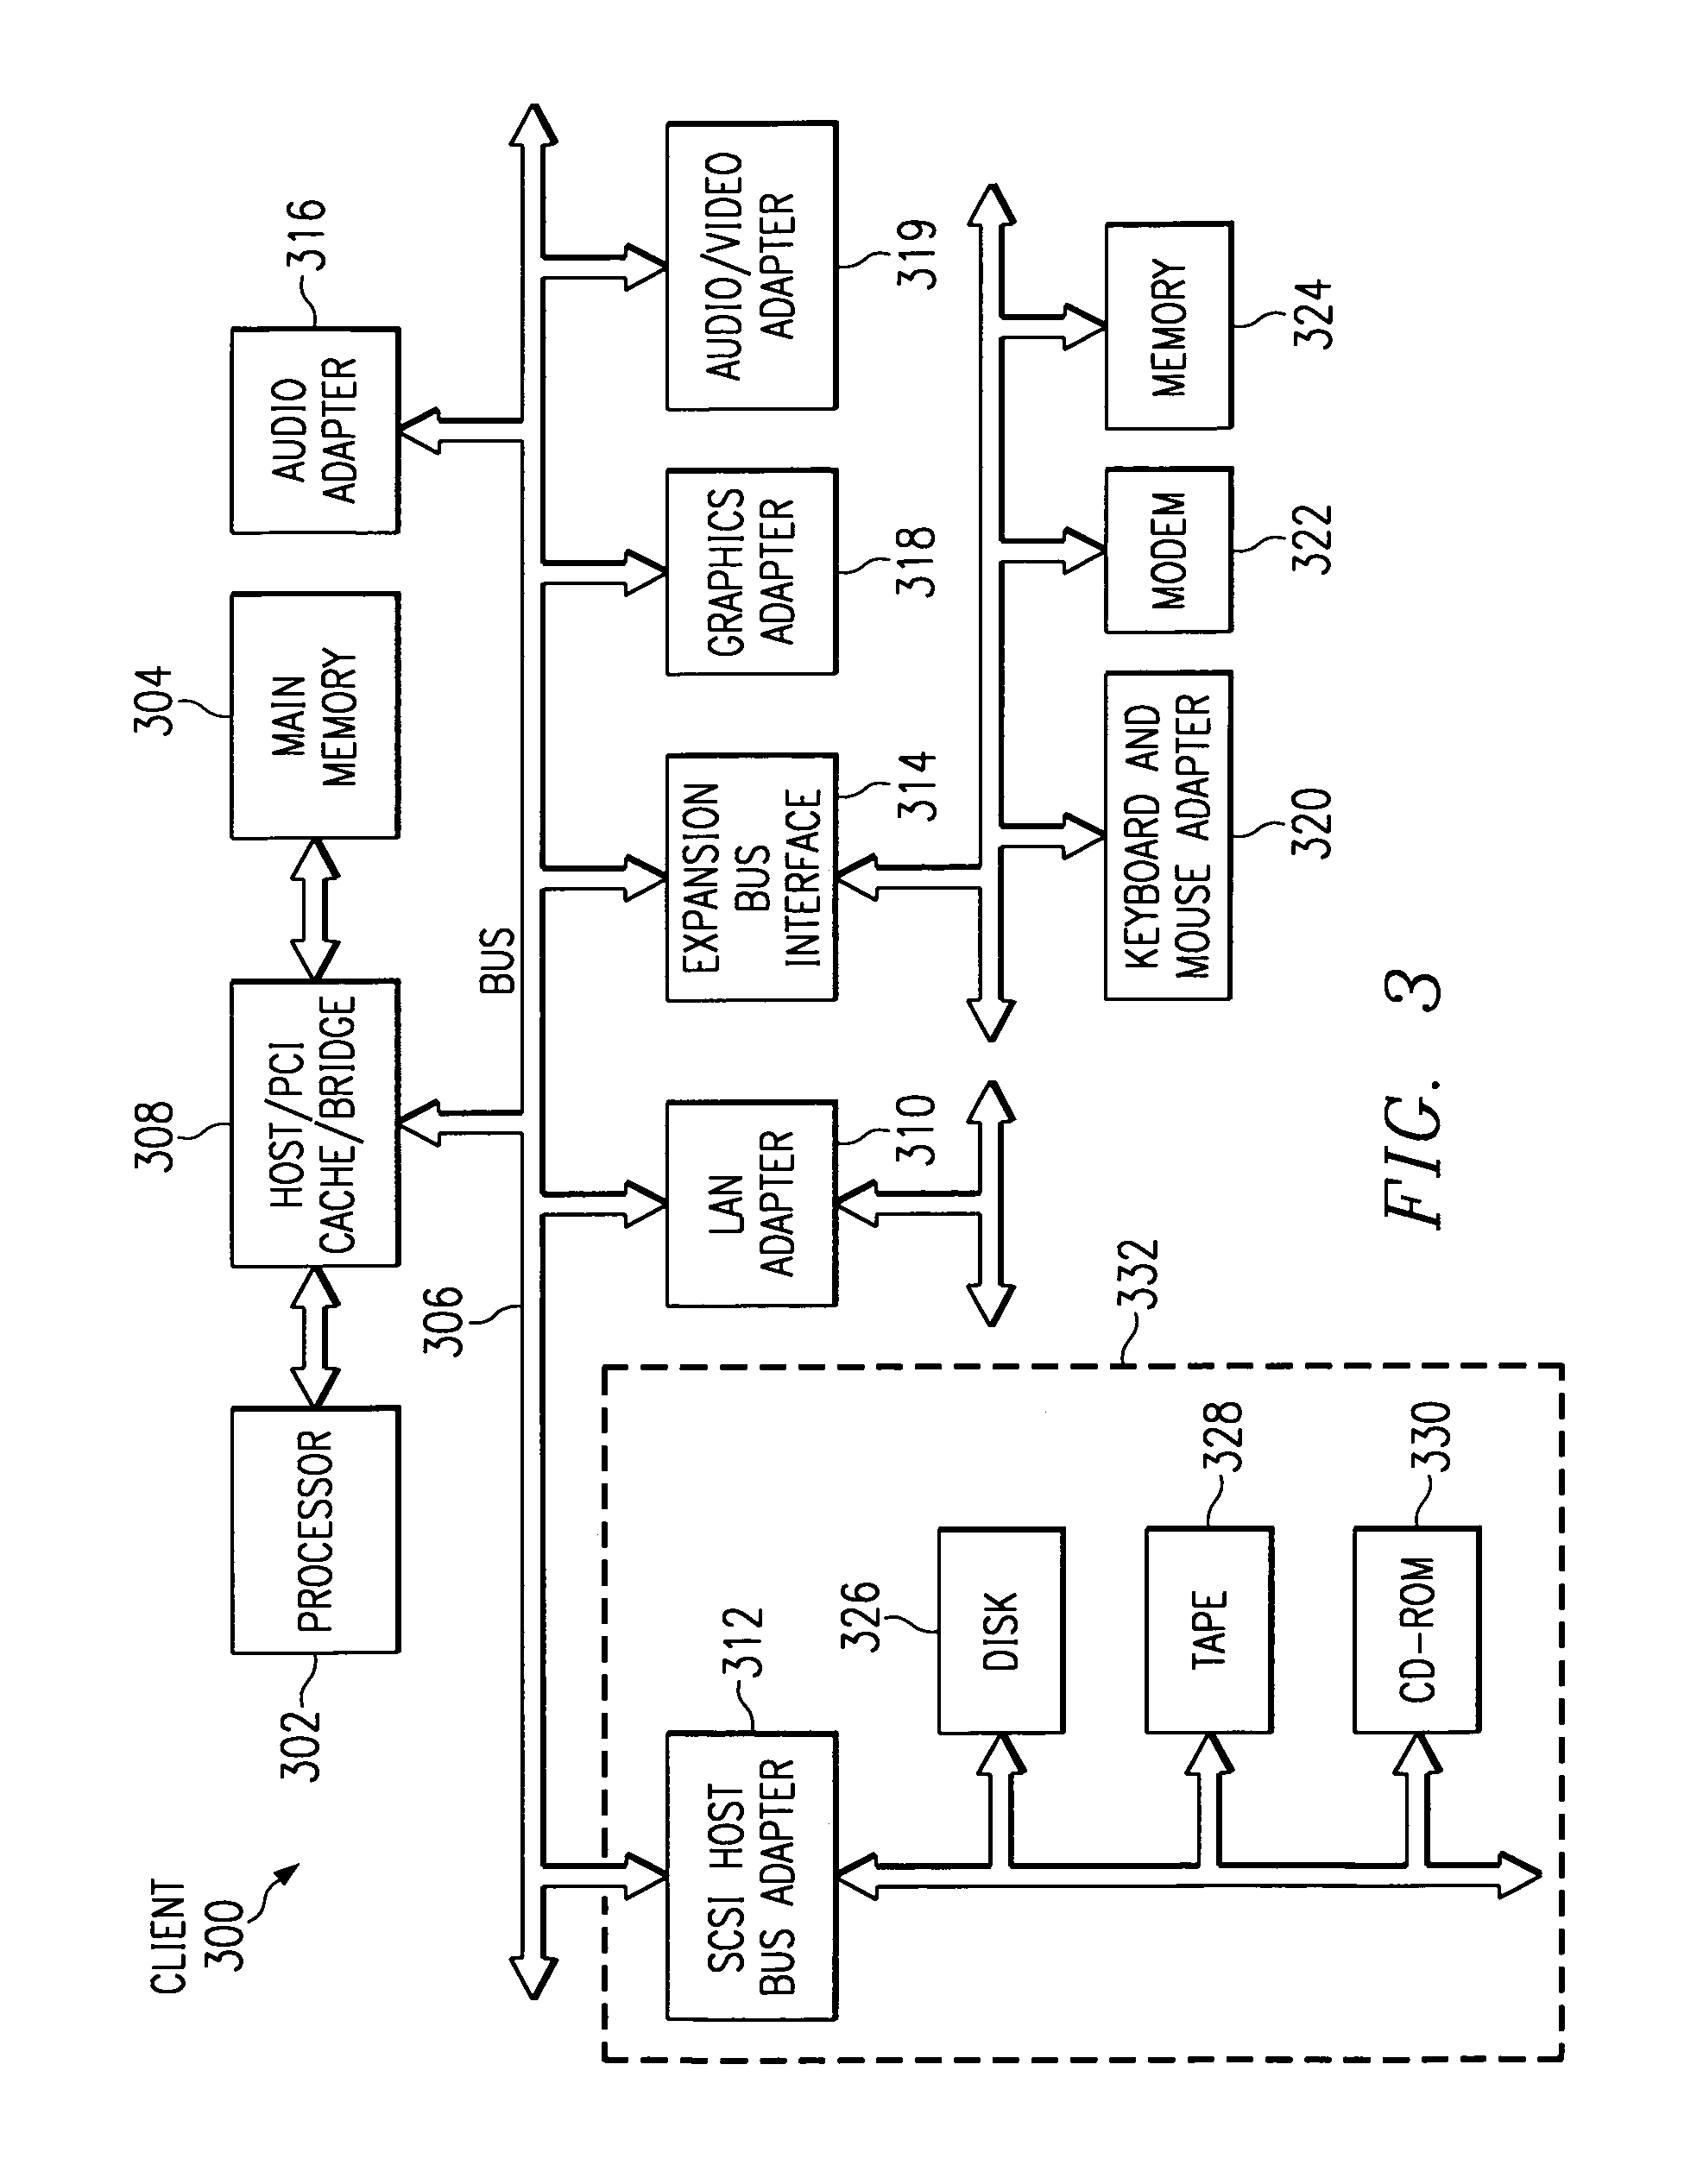 Method and apparatus for adding data attributes to e-mail messages to enhance the analysis of delivery failures